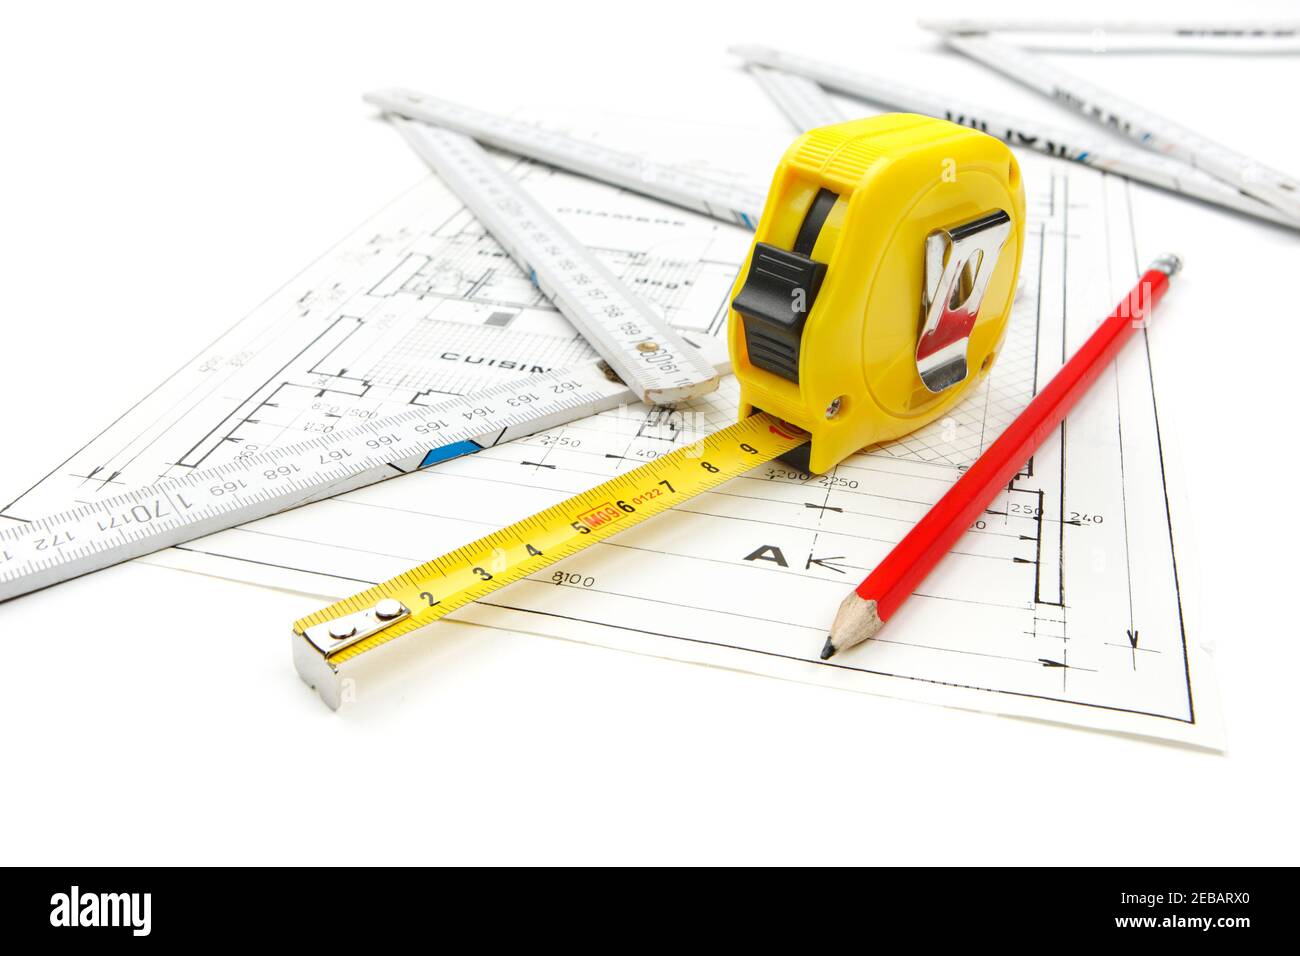 Work tools equipment arranged on house construction plans with tape measure, pencil and wooden ruler. Shooting studio photo isolated on white backgrou Stock Photo